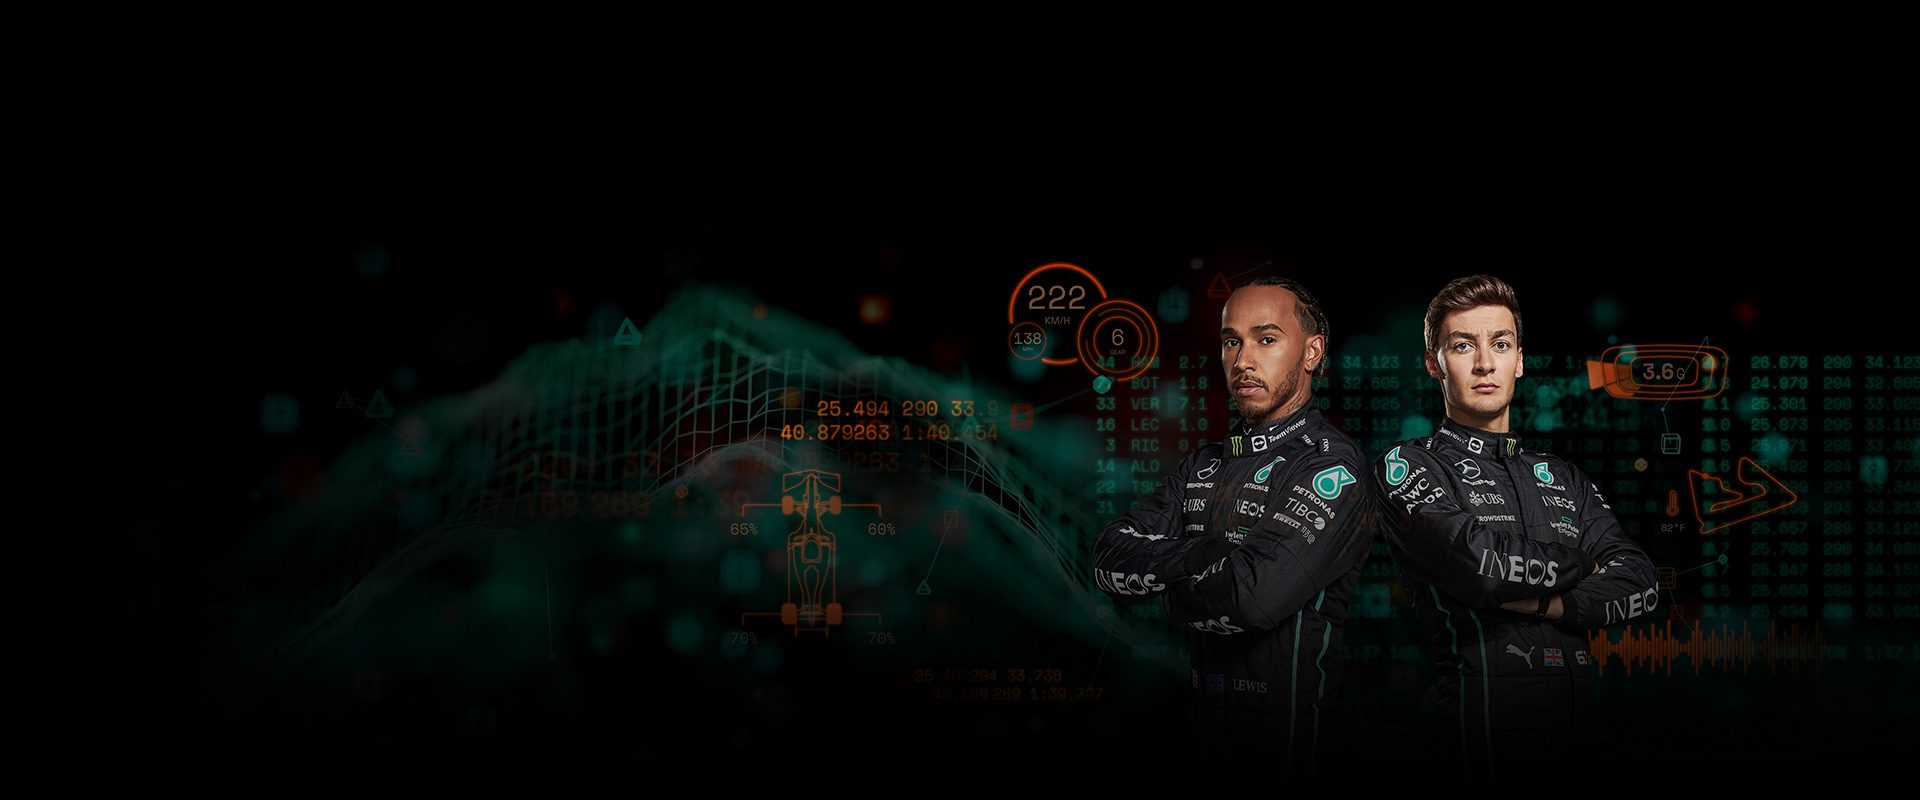 Lewis Hamilton and Valtteri Bottas from the Mercedes F1 race team